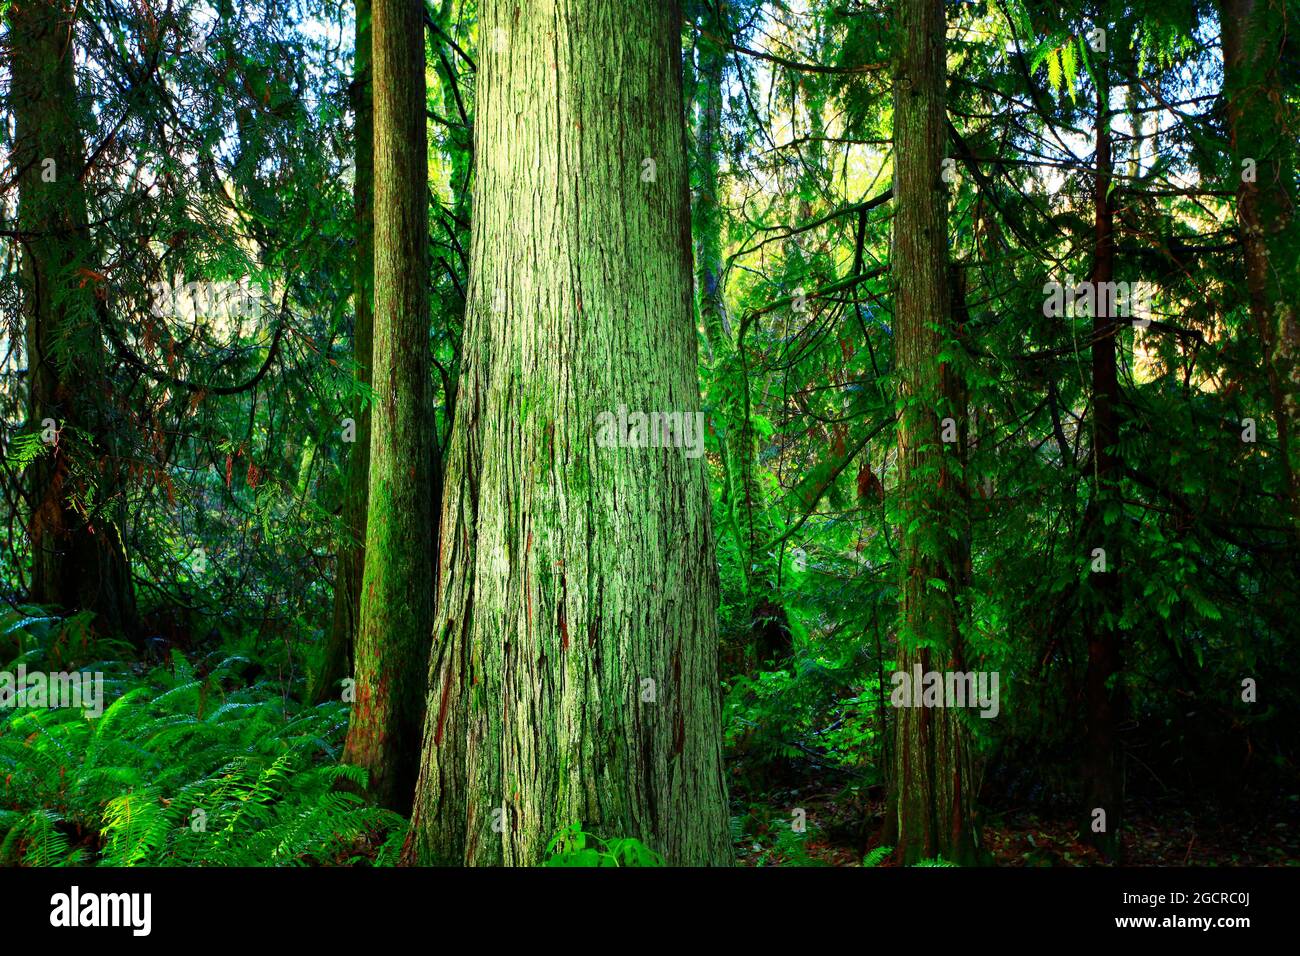 a exterior picture of an Pacific Northwest rainforest with Western red cedar trees Stock Photo